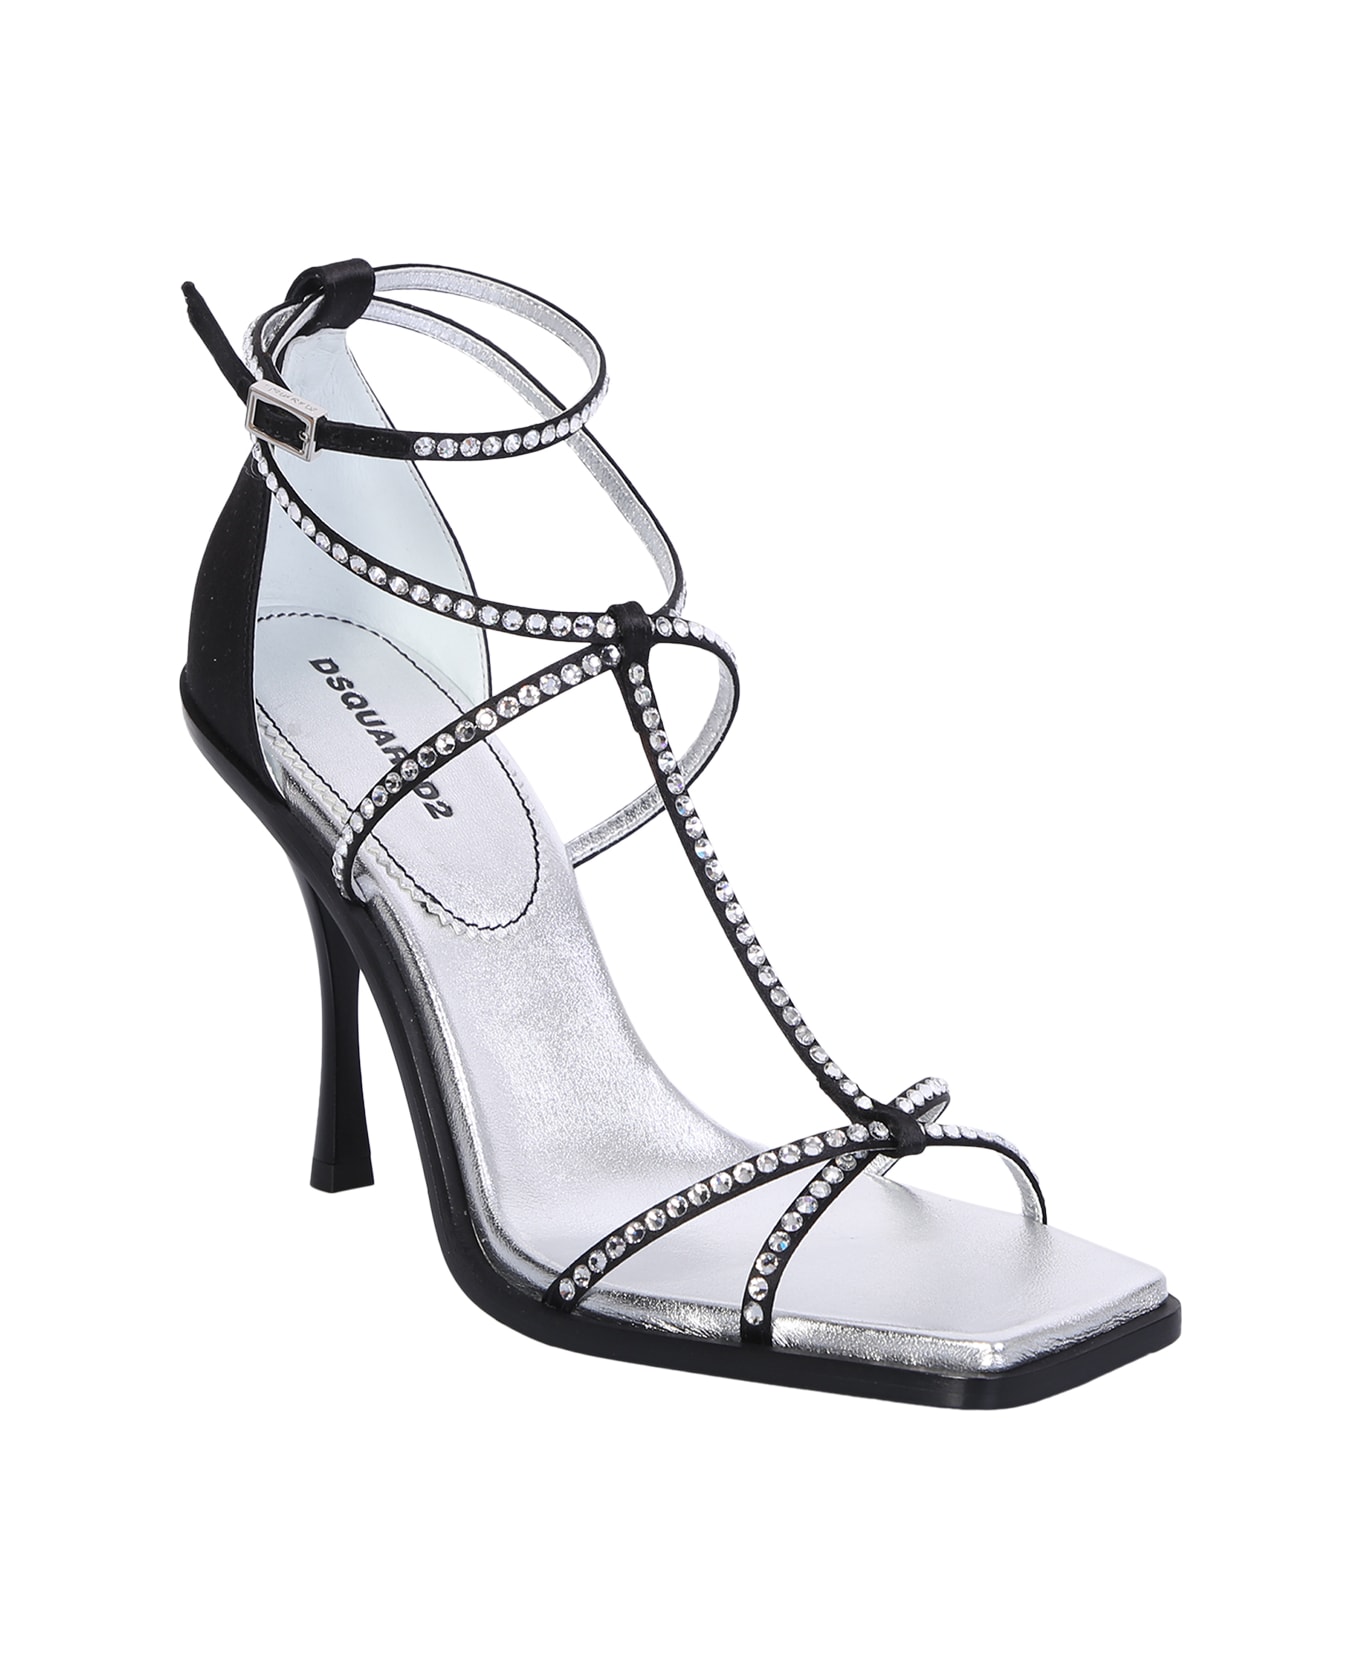 Dsquared2 Ankle Strap Sandals - Black サンダル